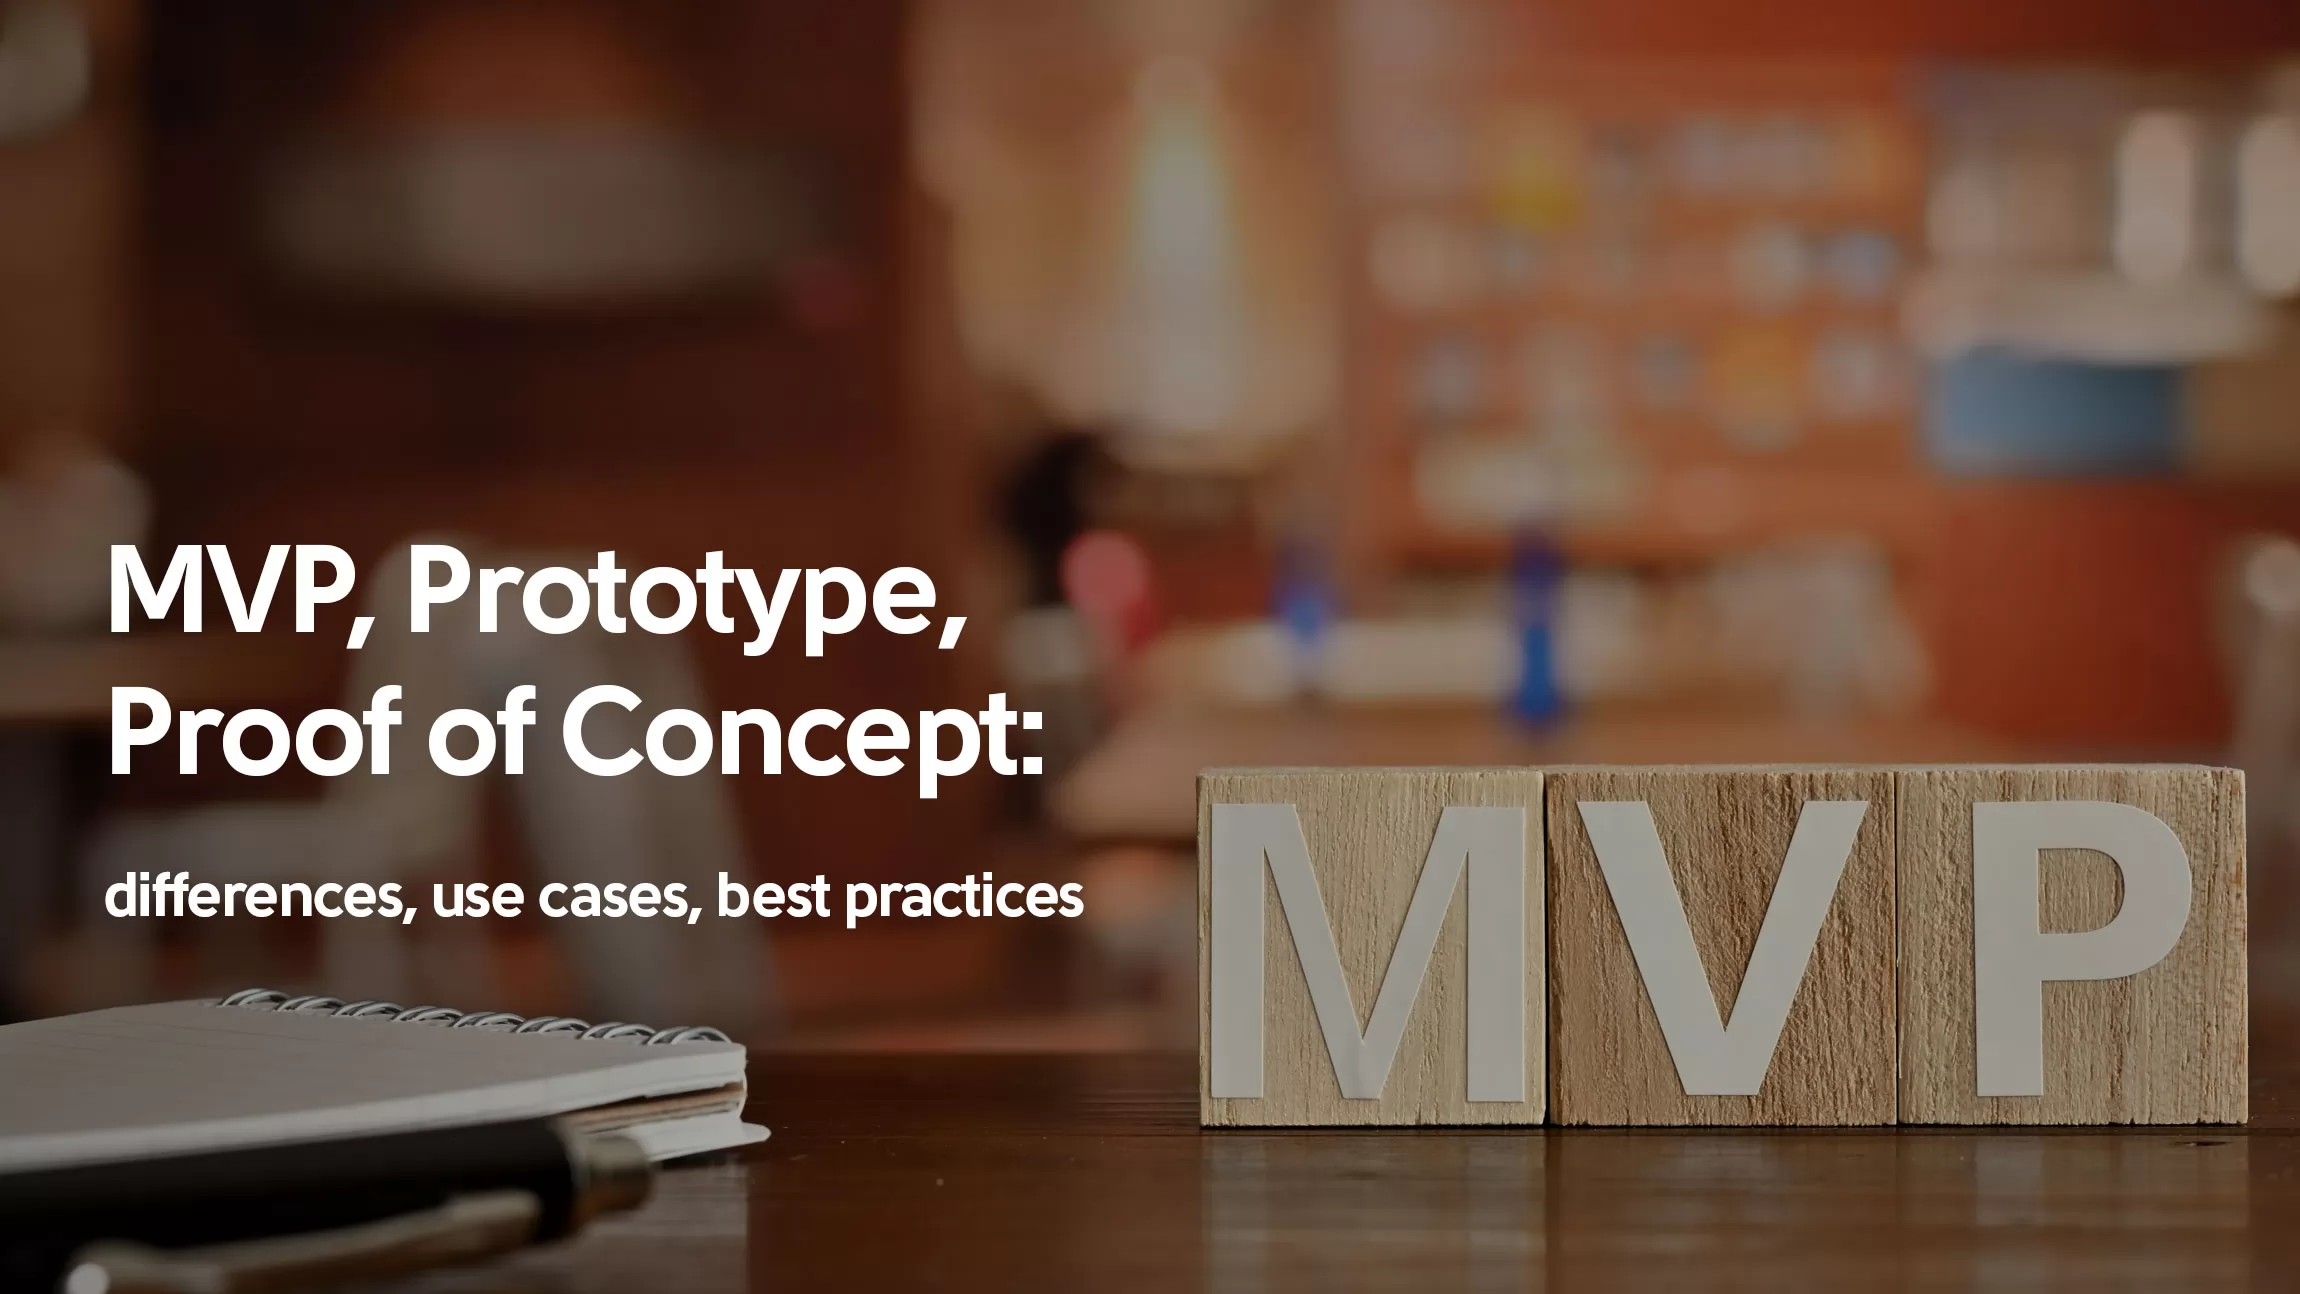 MVP, Prototype, Proof of Concept: Differences, Use Cases, Best Practices